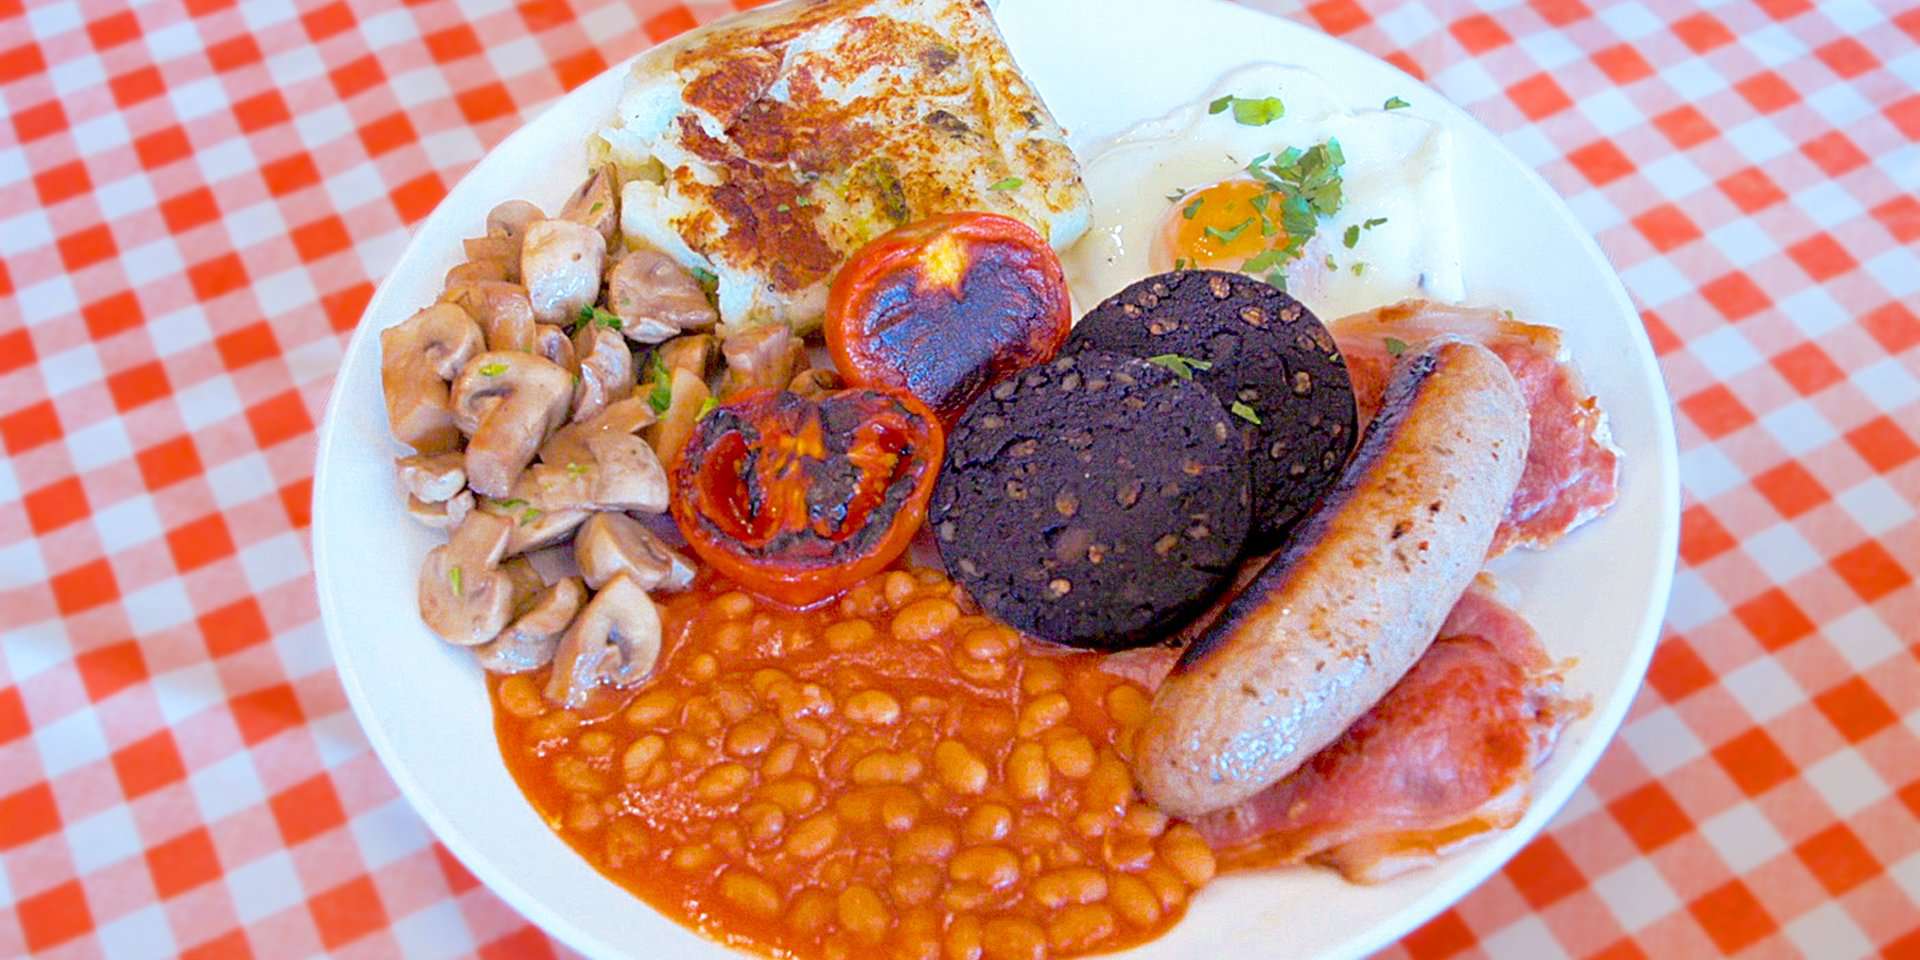 Taboola Ad Example 53542 - Why Terry’s Cafe Makes The Best Full English Breakfast In London